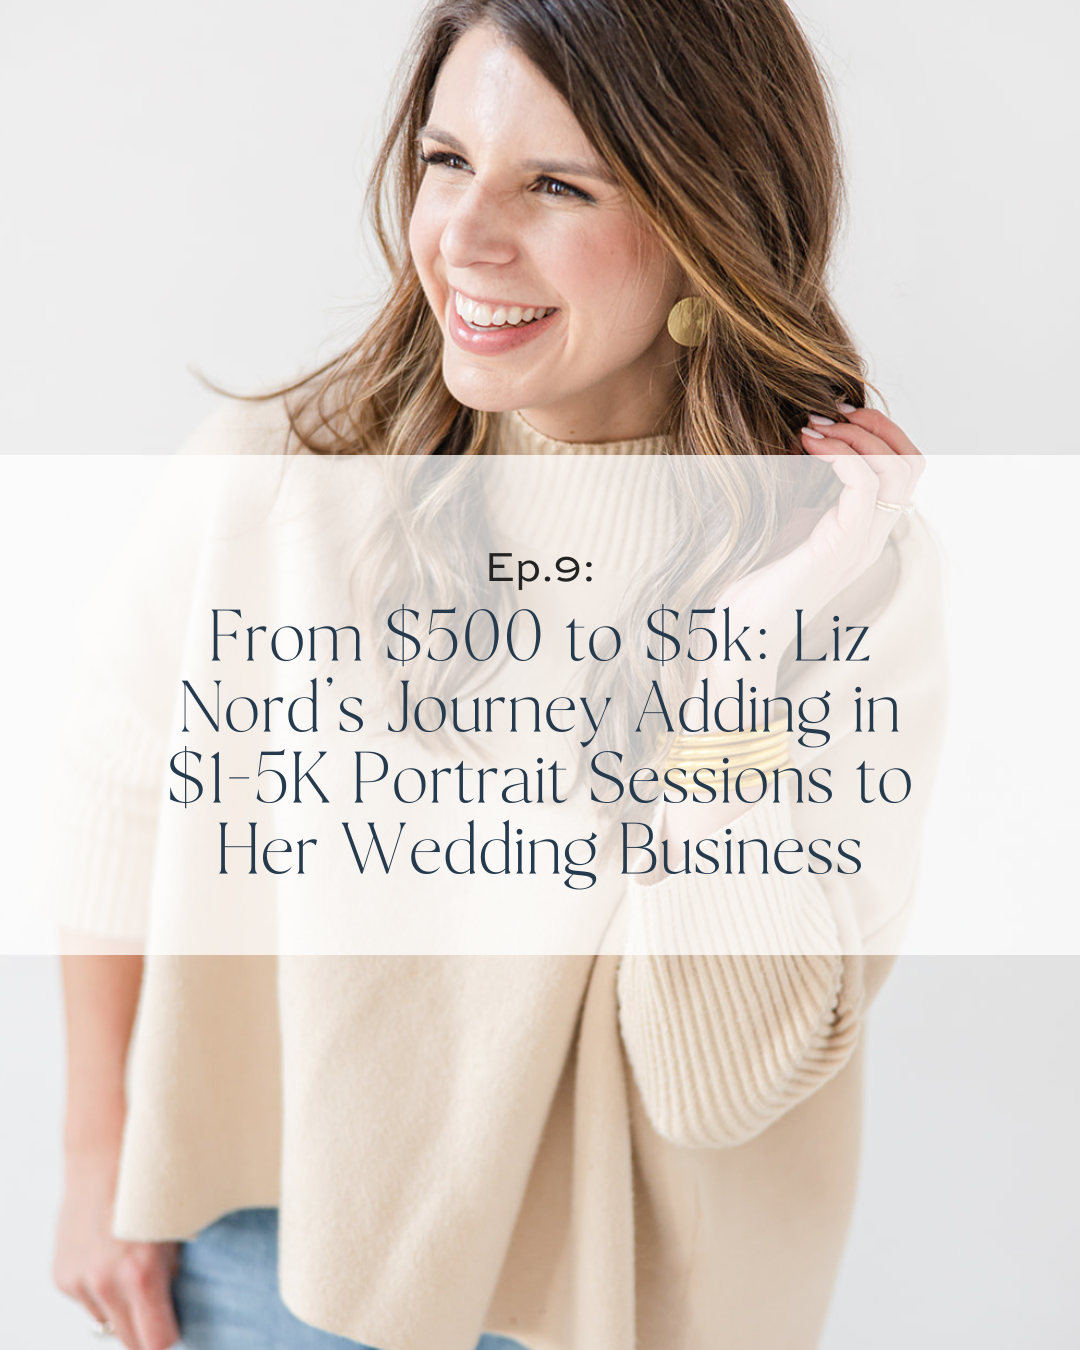 Liz Nord’s Journey Adding in $1-5K Portrait Sessions to Her Wedding Business